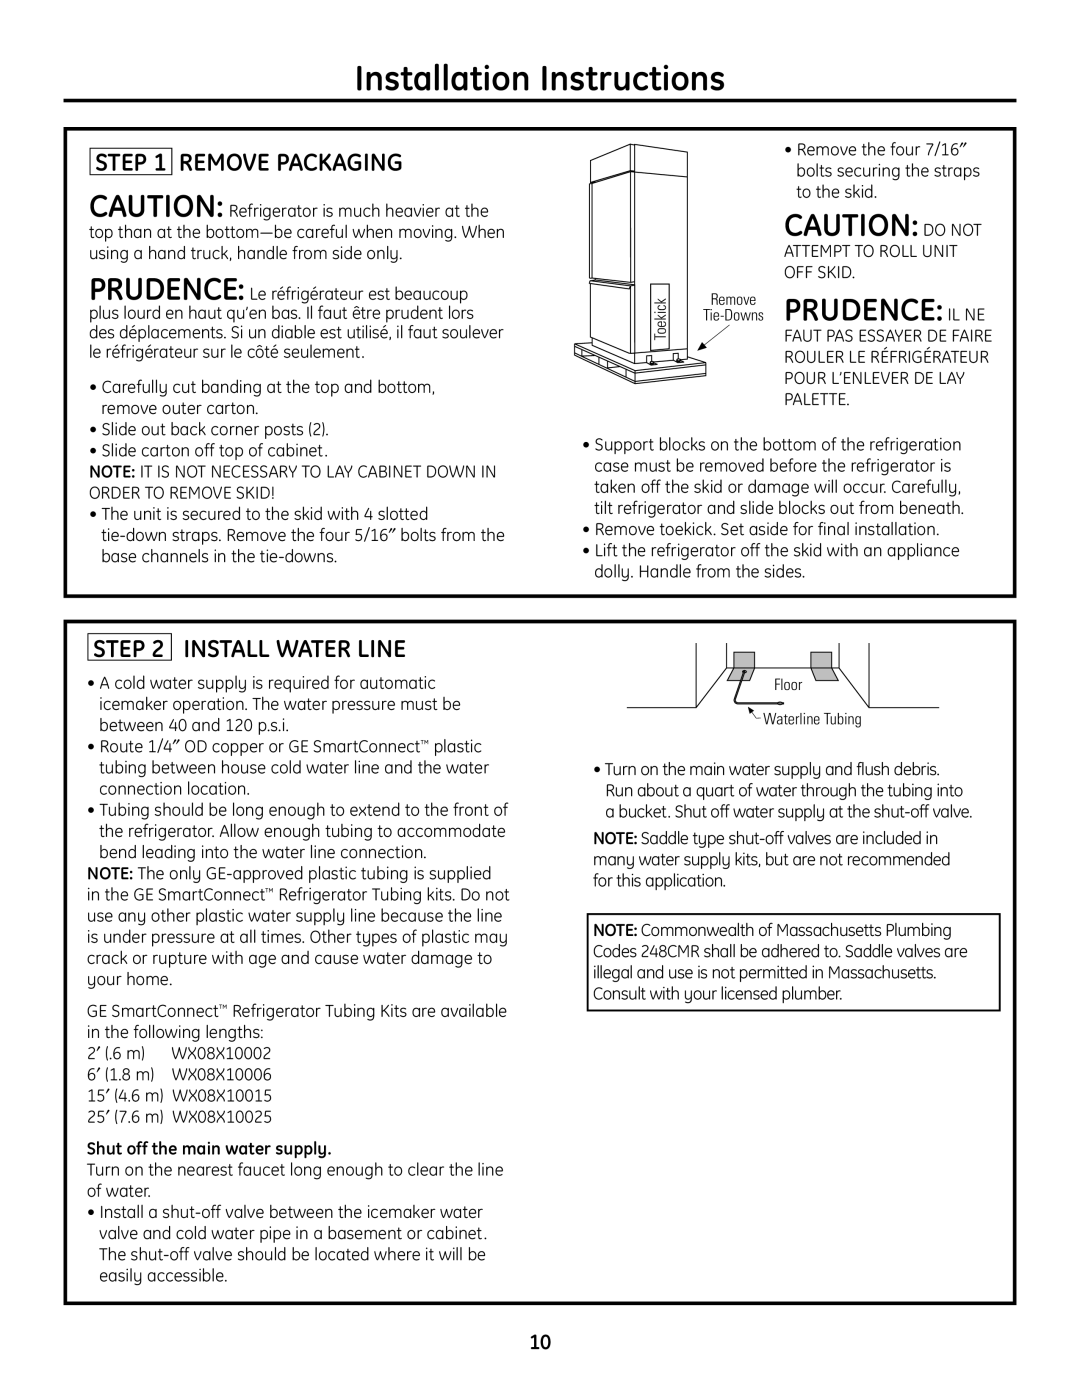 GE 49-60468-1 Remove Packaging, Install Water Line, Shut off the main water supply, Installation Instructions 